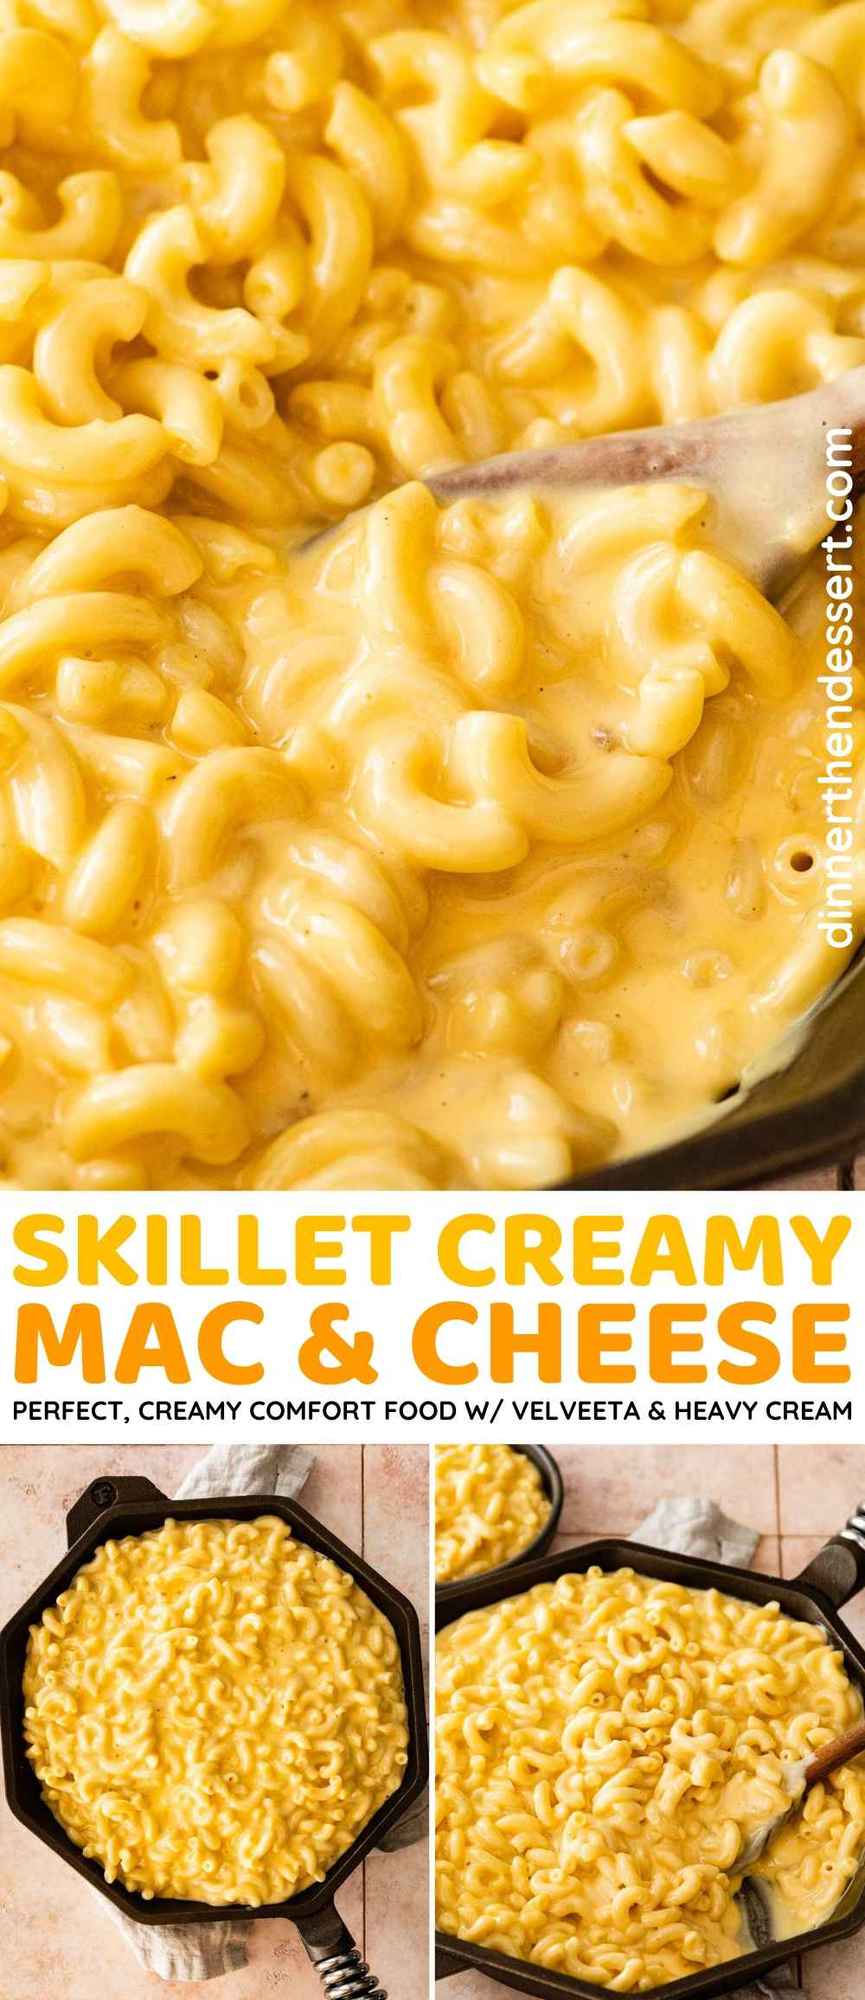 Skillet Creamy Mac and Cheese collage